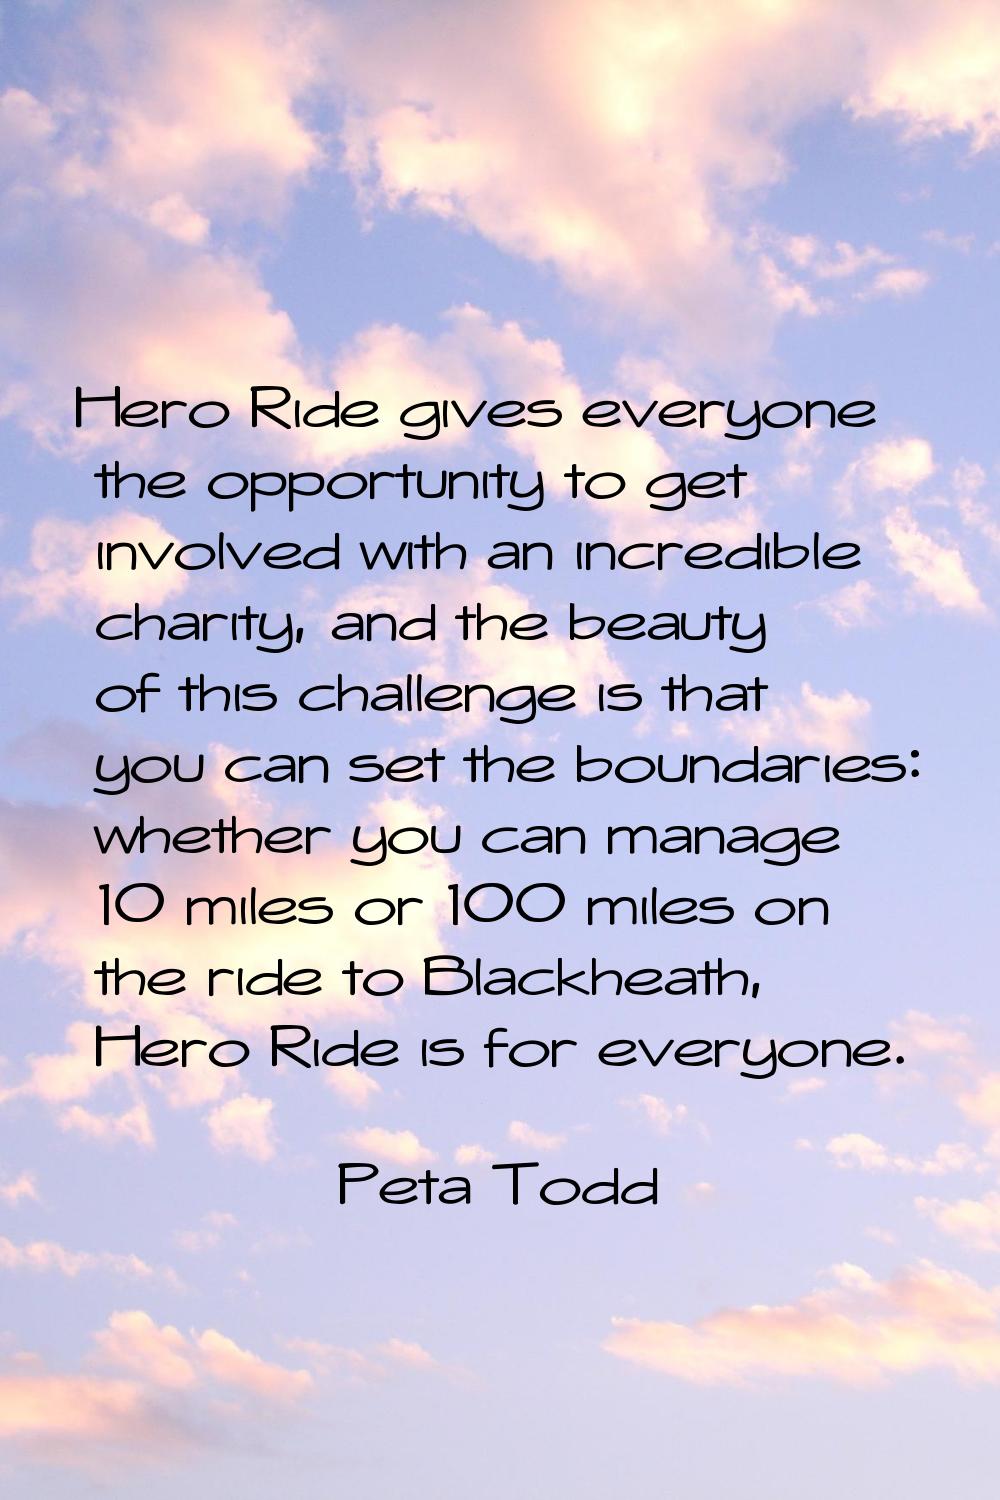 Hero Ride gives everyone the opportunity to get involved with an incredible charity, and the beauty